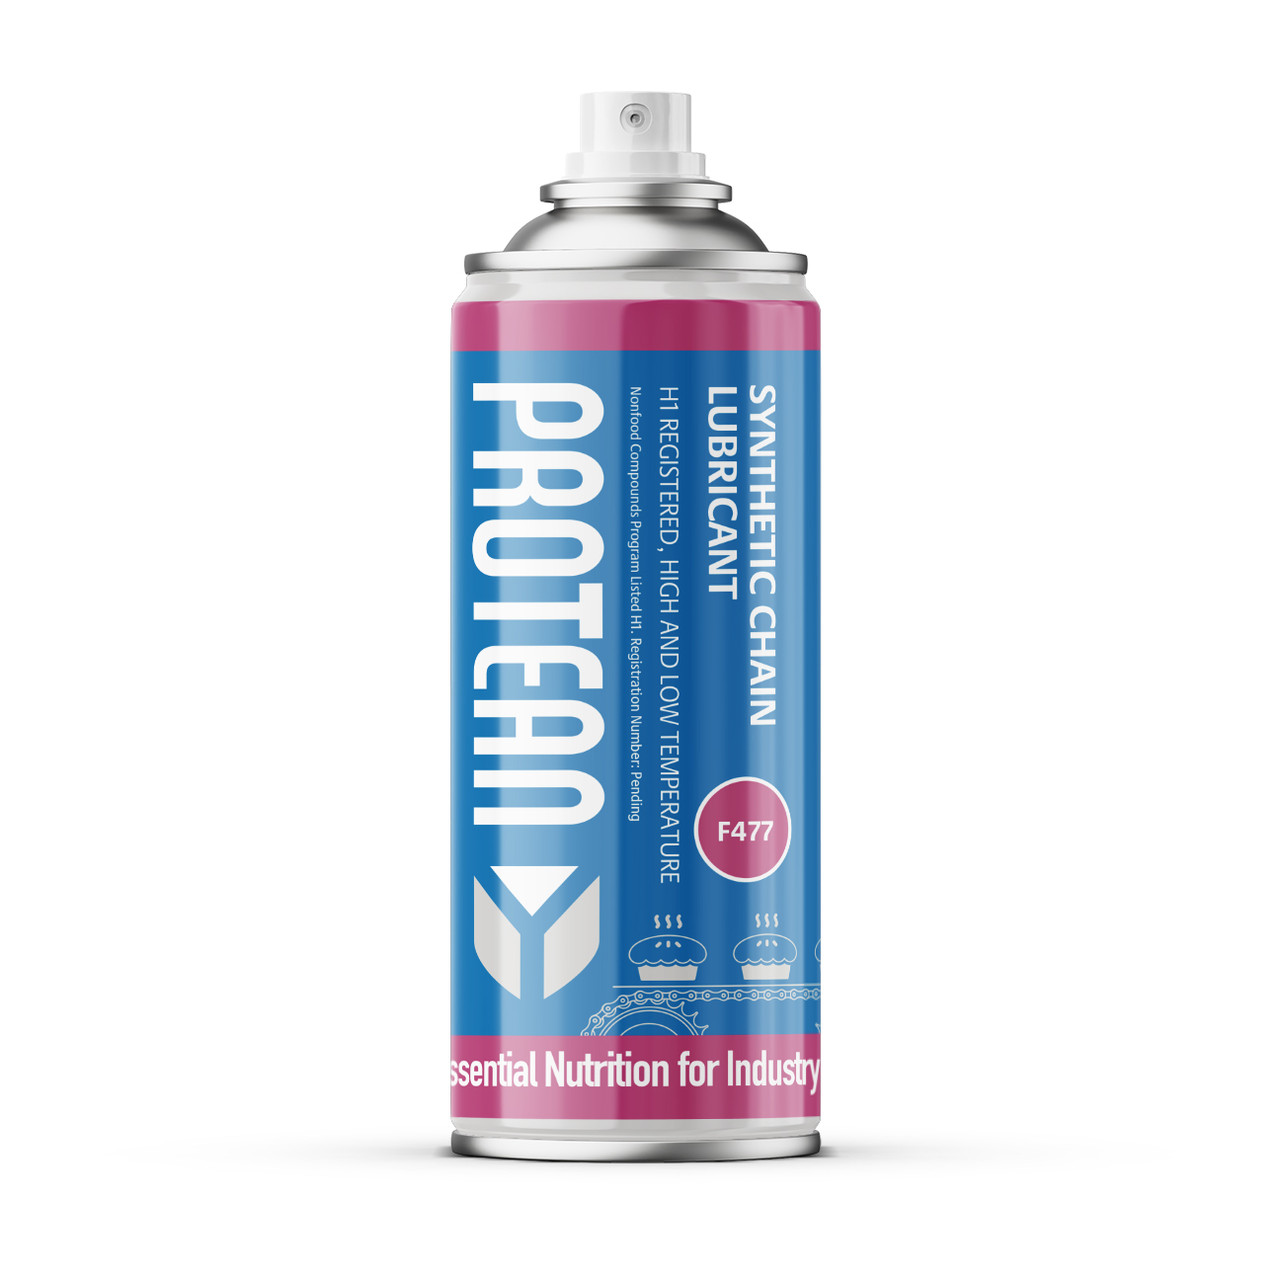 https://commercial.fordfuels.co.uk/wp-content/uploads/sites/10/Protean-Synthetic-Chain-Lubricant-350x350.jpg+https://commercial.fordfuels.co.uk/wp-content/uploads/sites/10/Protean-Synthetic-Chain-Lubricant-700x700.jpg